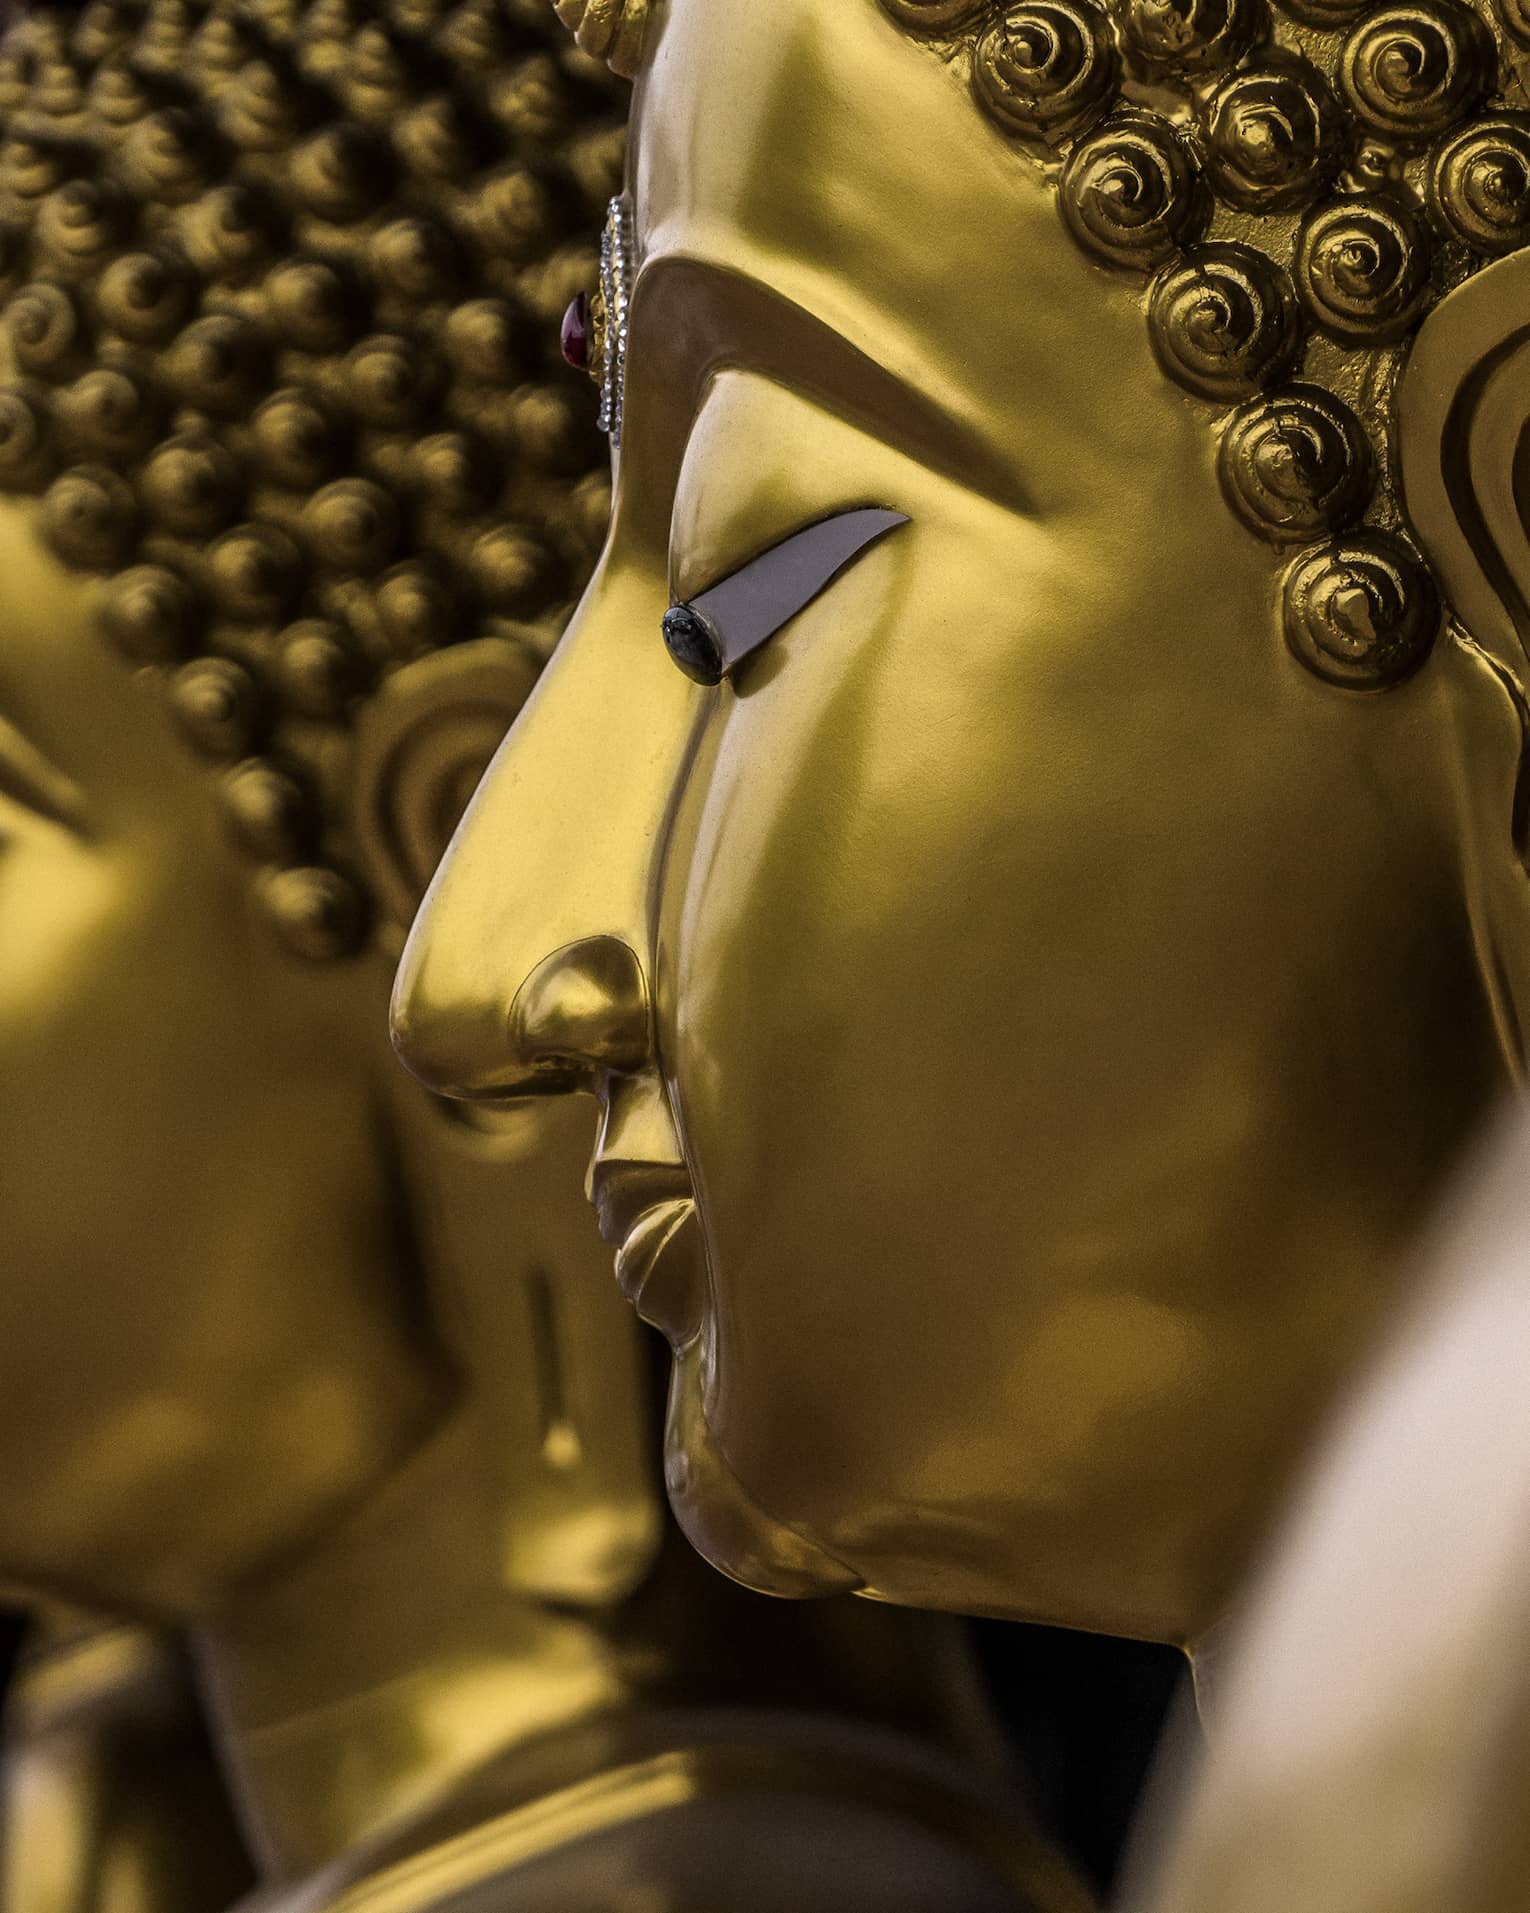 Two gold statues, side of women's face showing nose, ears, closed eyes and hair